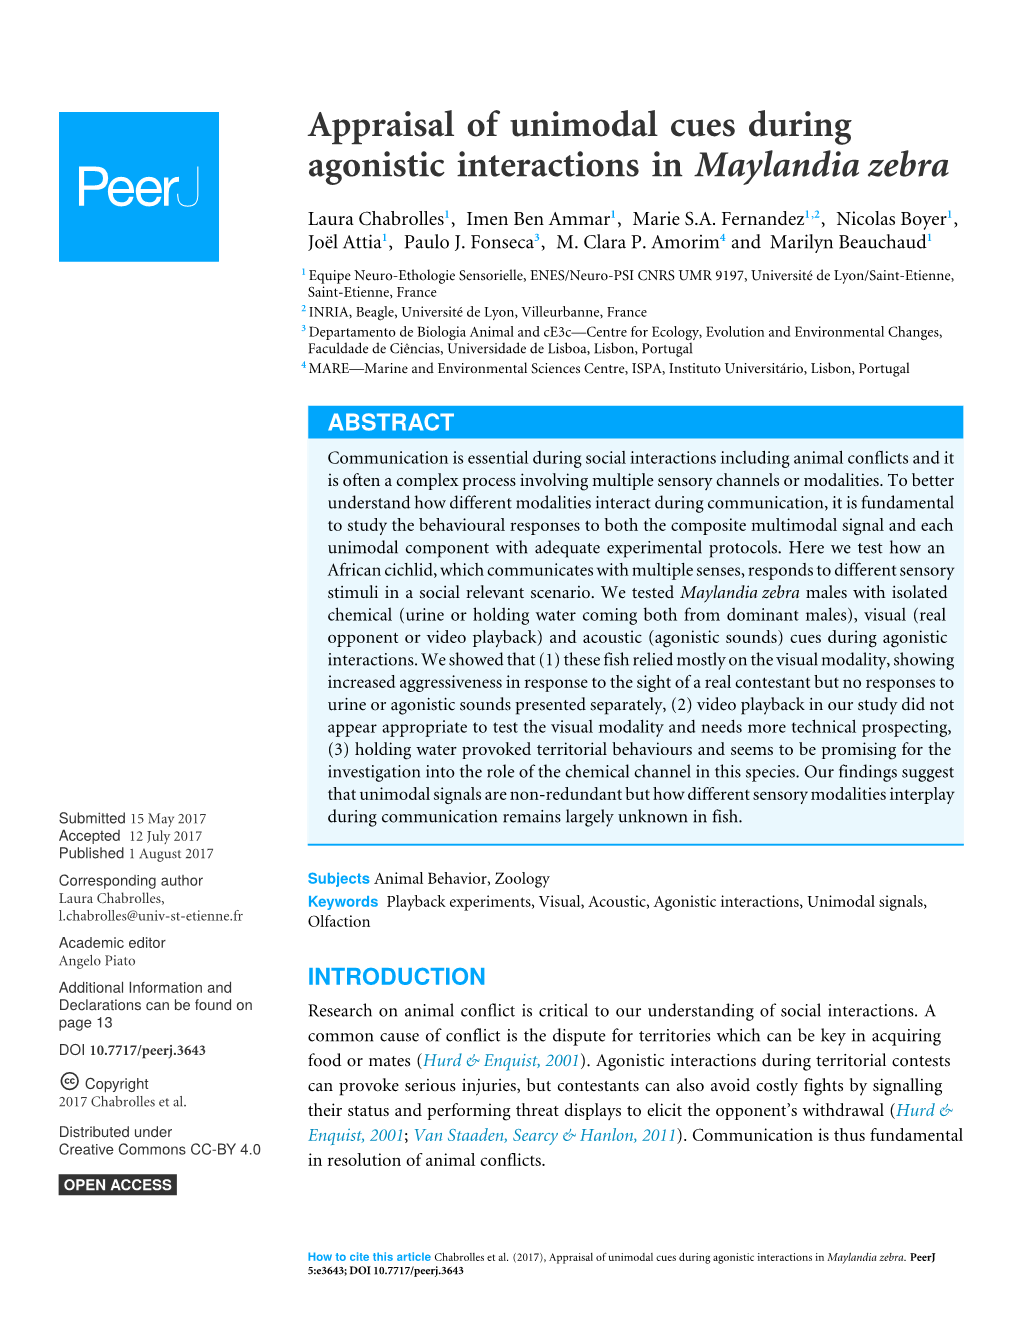 Appraisal of Unimodal Cues During Agonistic Interactions in Maylandia Zebra